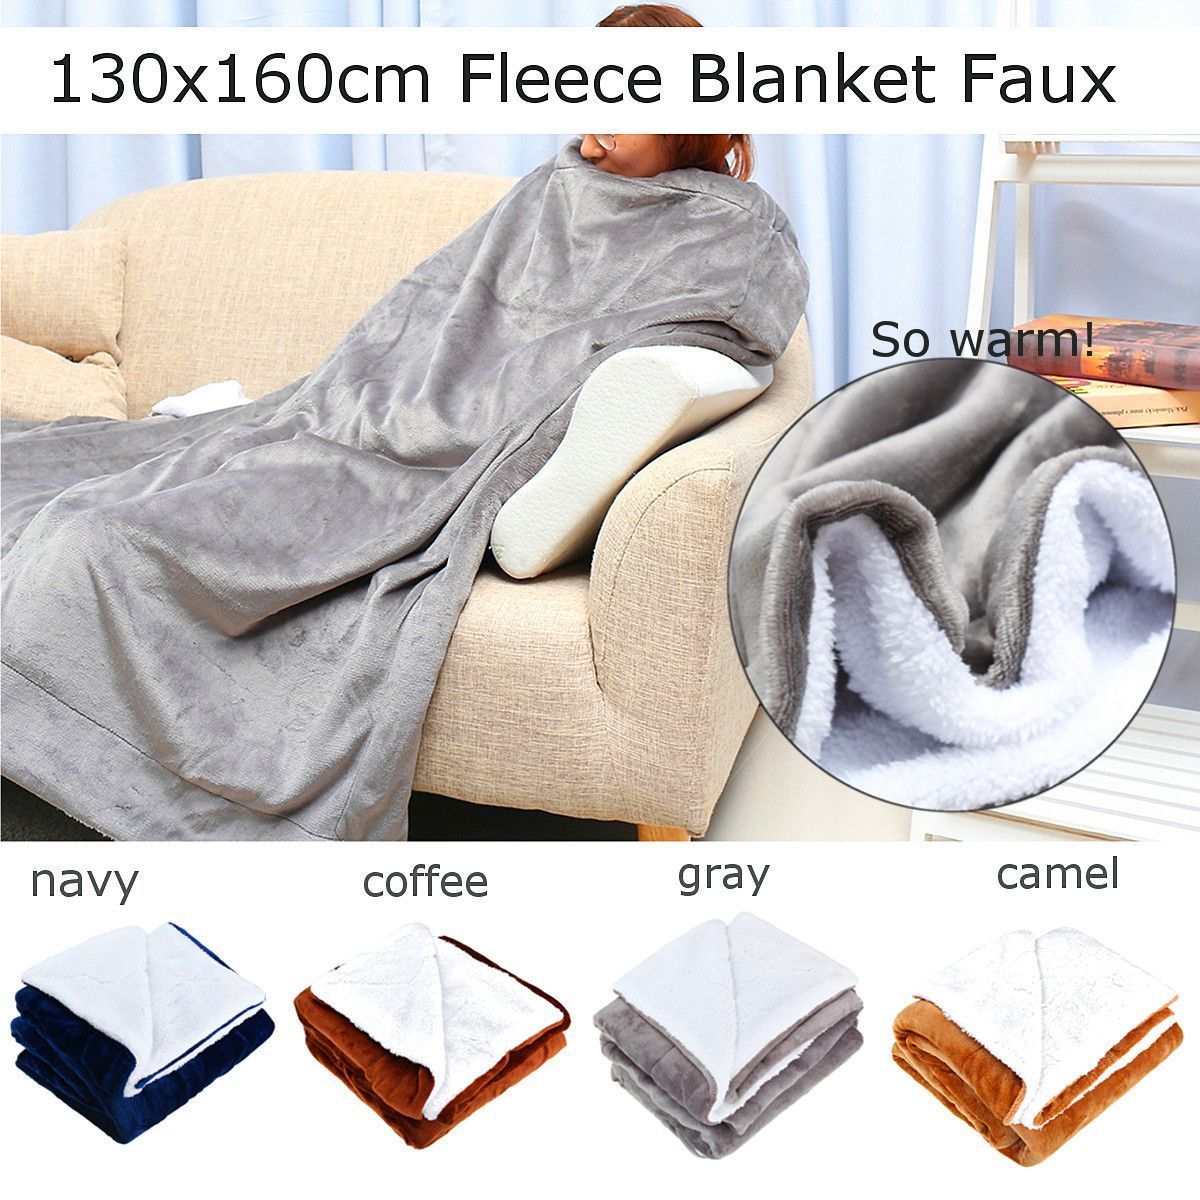 4-Colors-Flannel-Sherpa-Throws-Fleece-Blankets-Sofa-Bedding-Office-Sleep-Large-Double-King-Soft-Warm-1559156